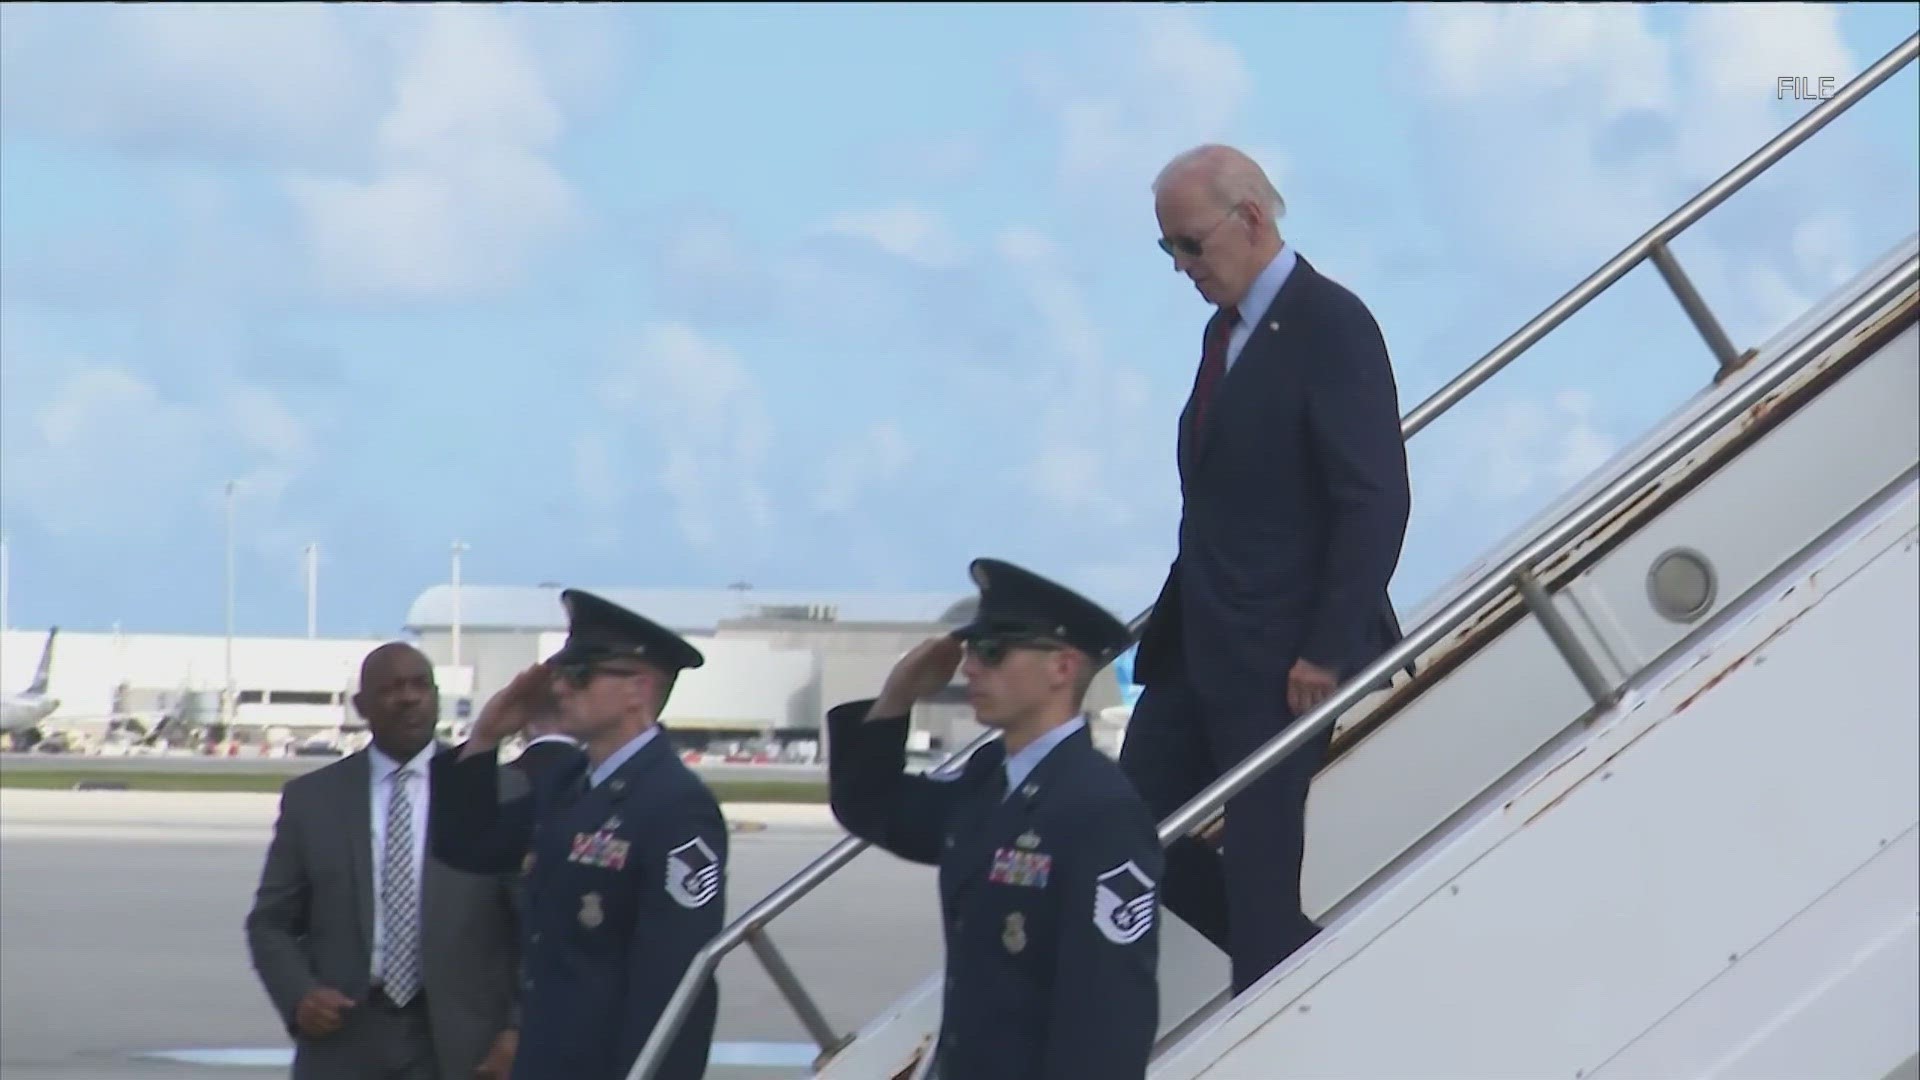 President Joe Biden and former president Donald Trump are expected to visit the Texas-Mexico border later this week.